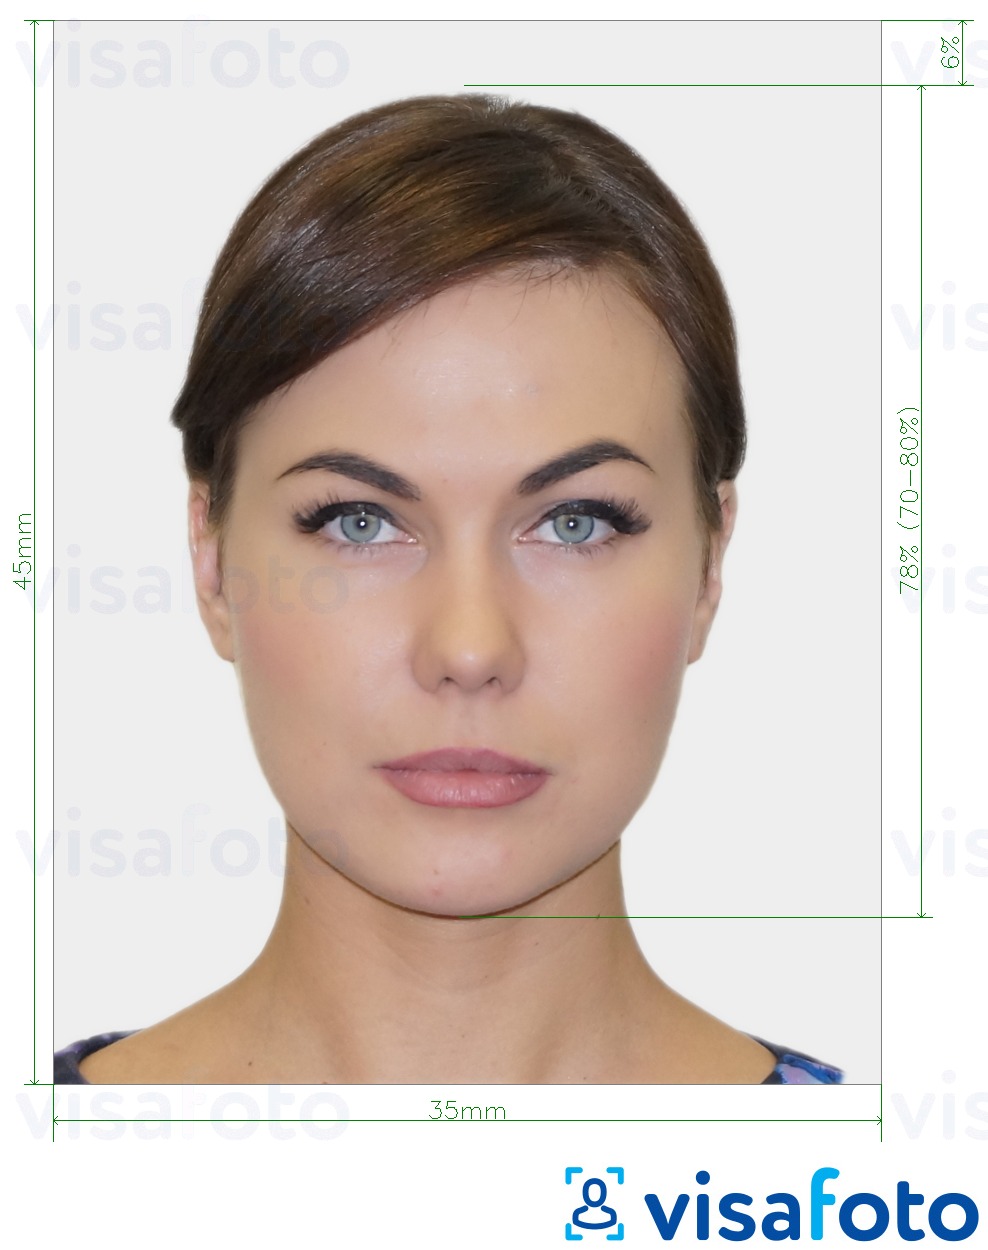 Example of photo for Biometric passport photo with exact size specification